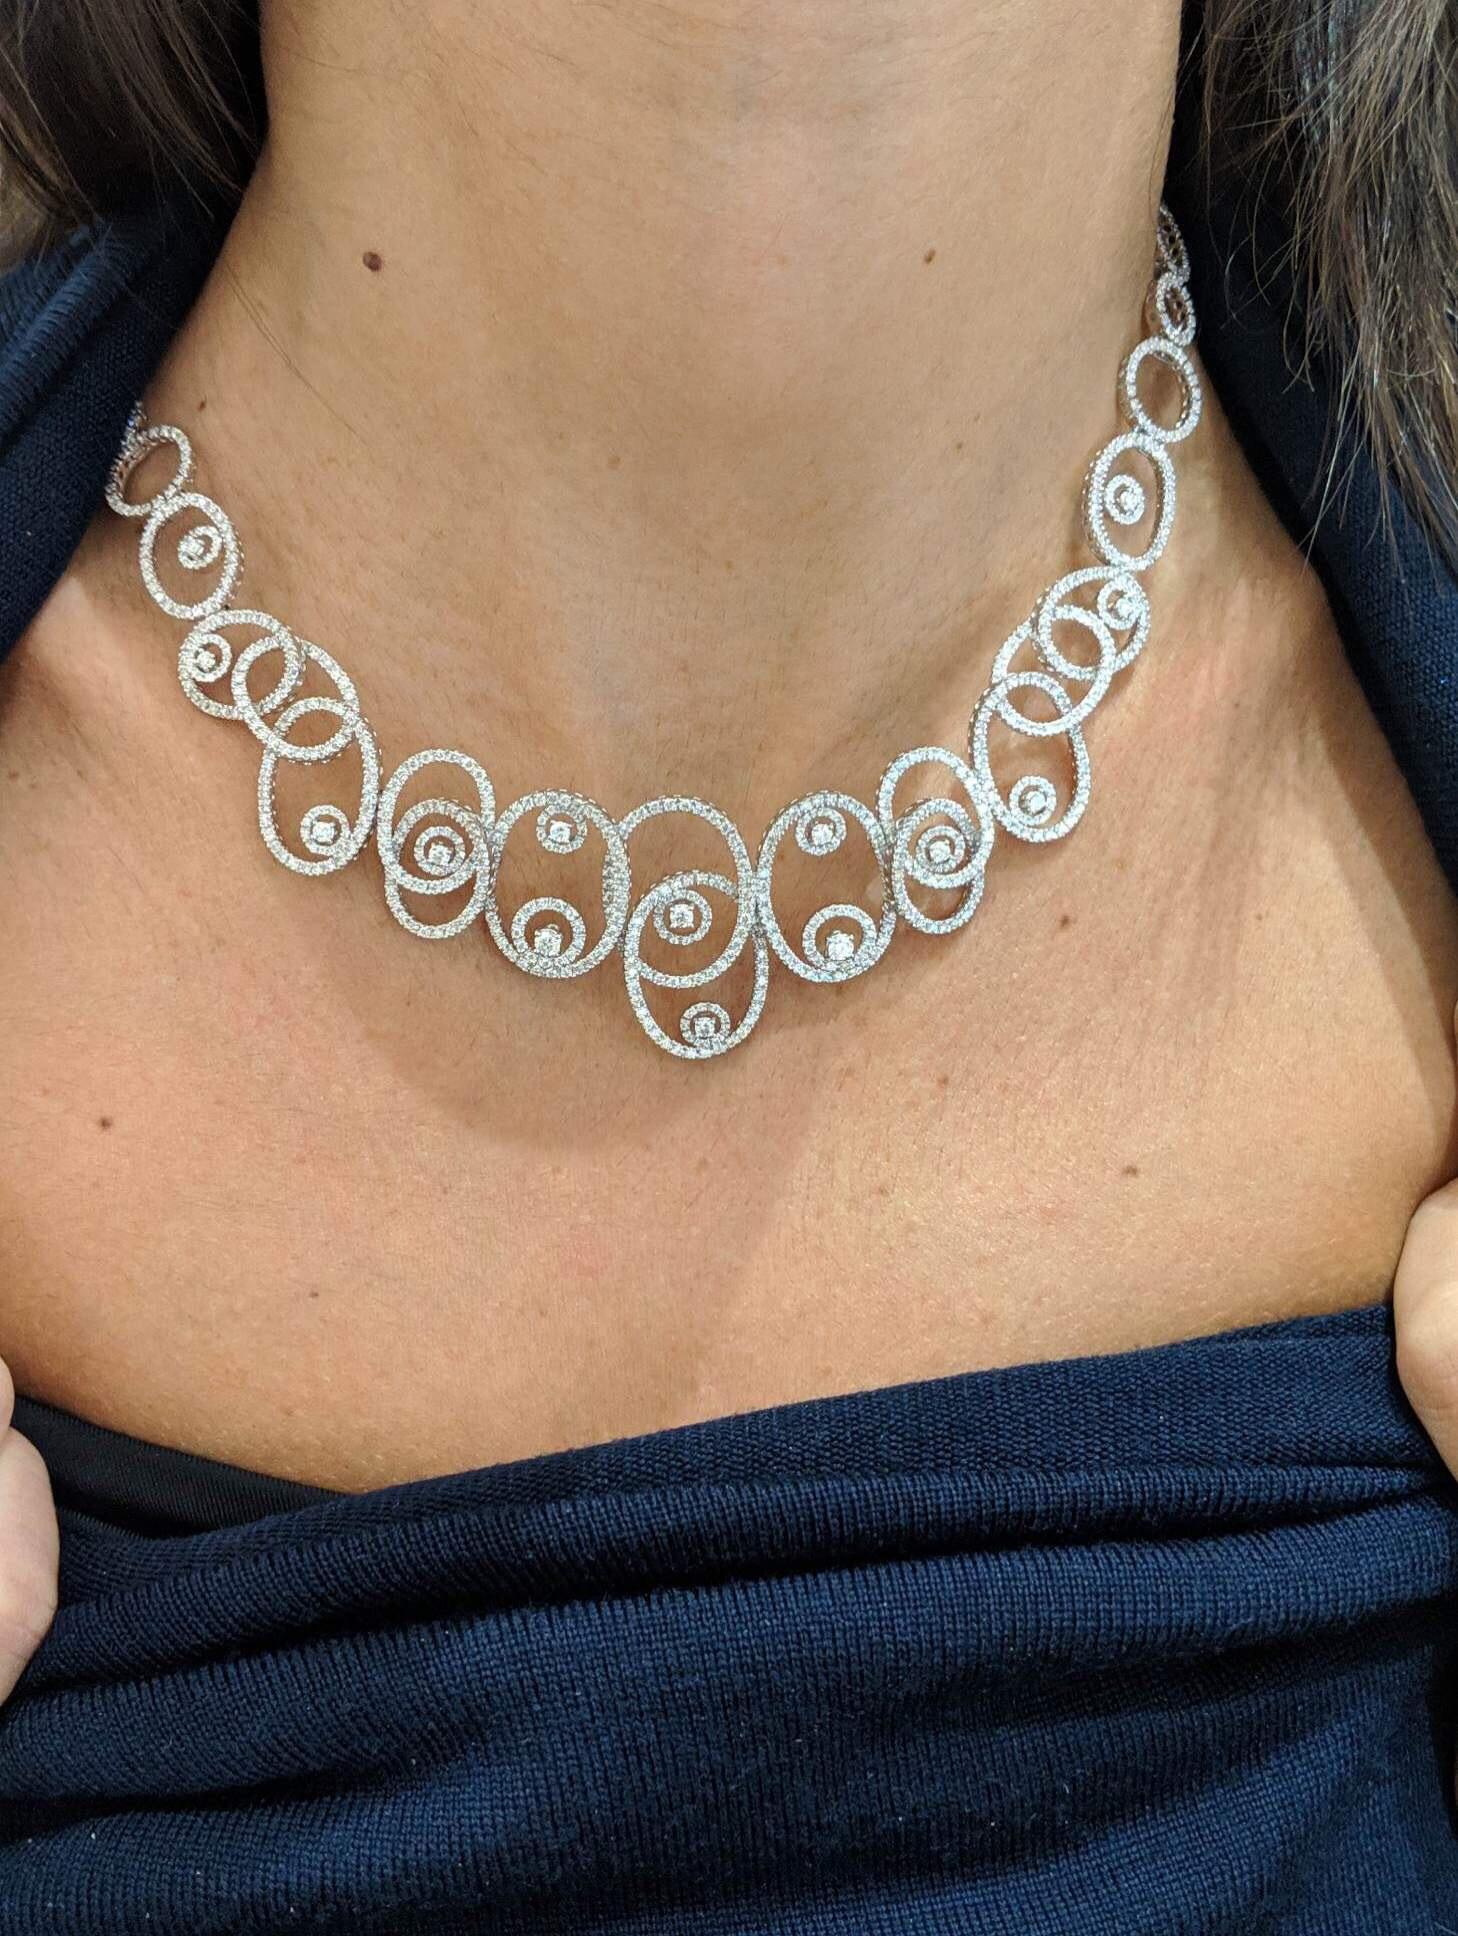 Leo Pizzo graduating  oval swirl motif necklace composed of 6.18 carats of micro-pave and round brilliant diamonds. The diamonds stop halfway around at which point the necklace is set in alternating sizes of 18 karat white gold circles. 
The piece